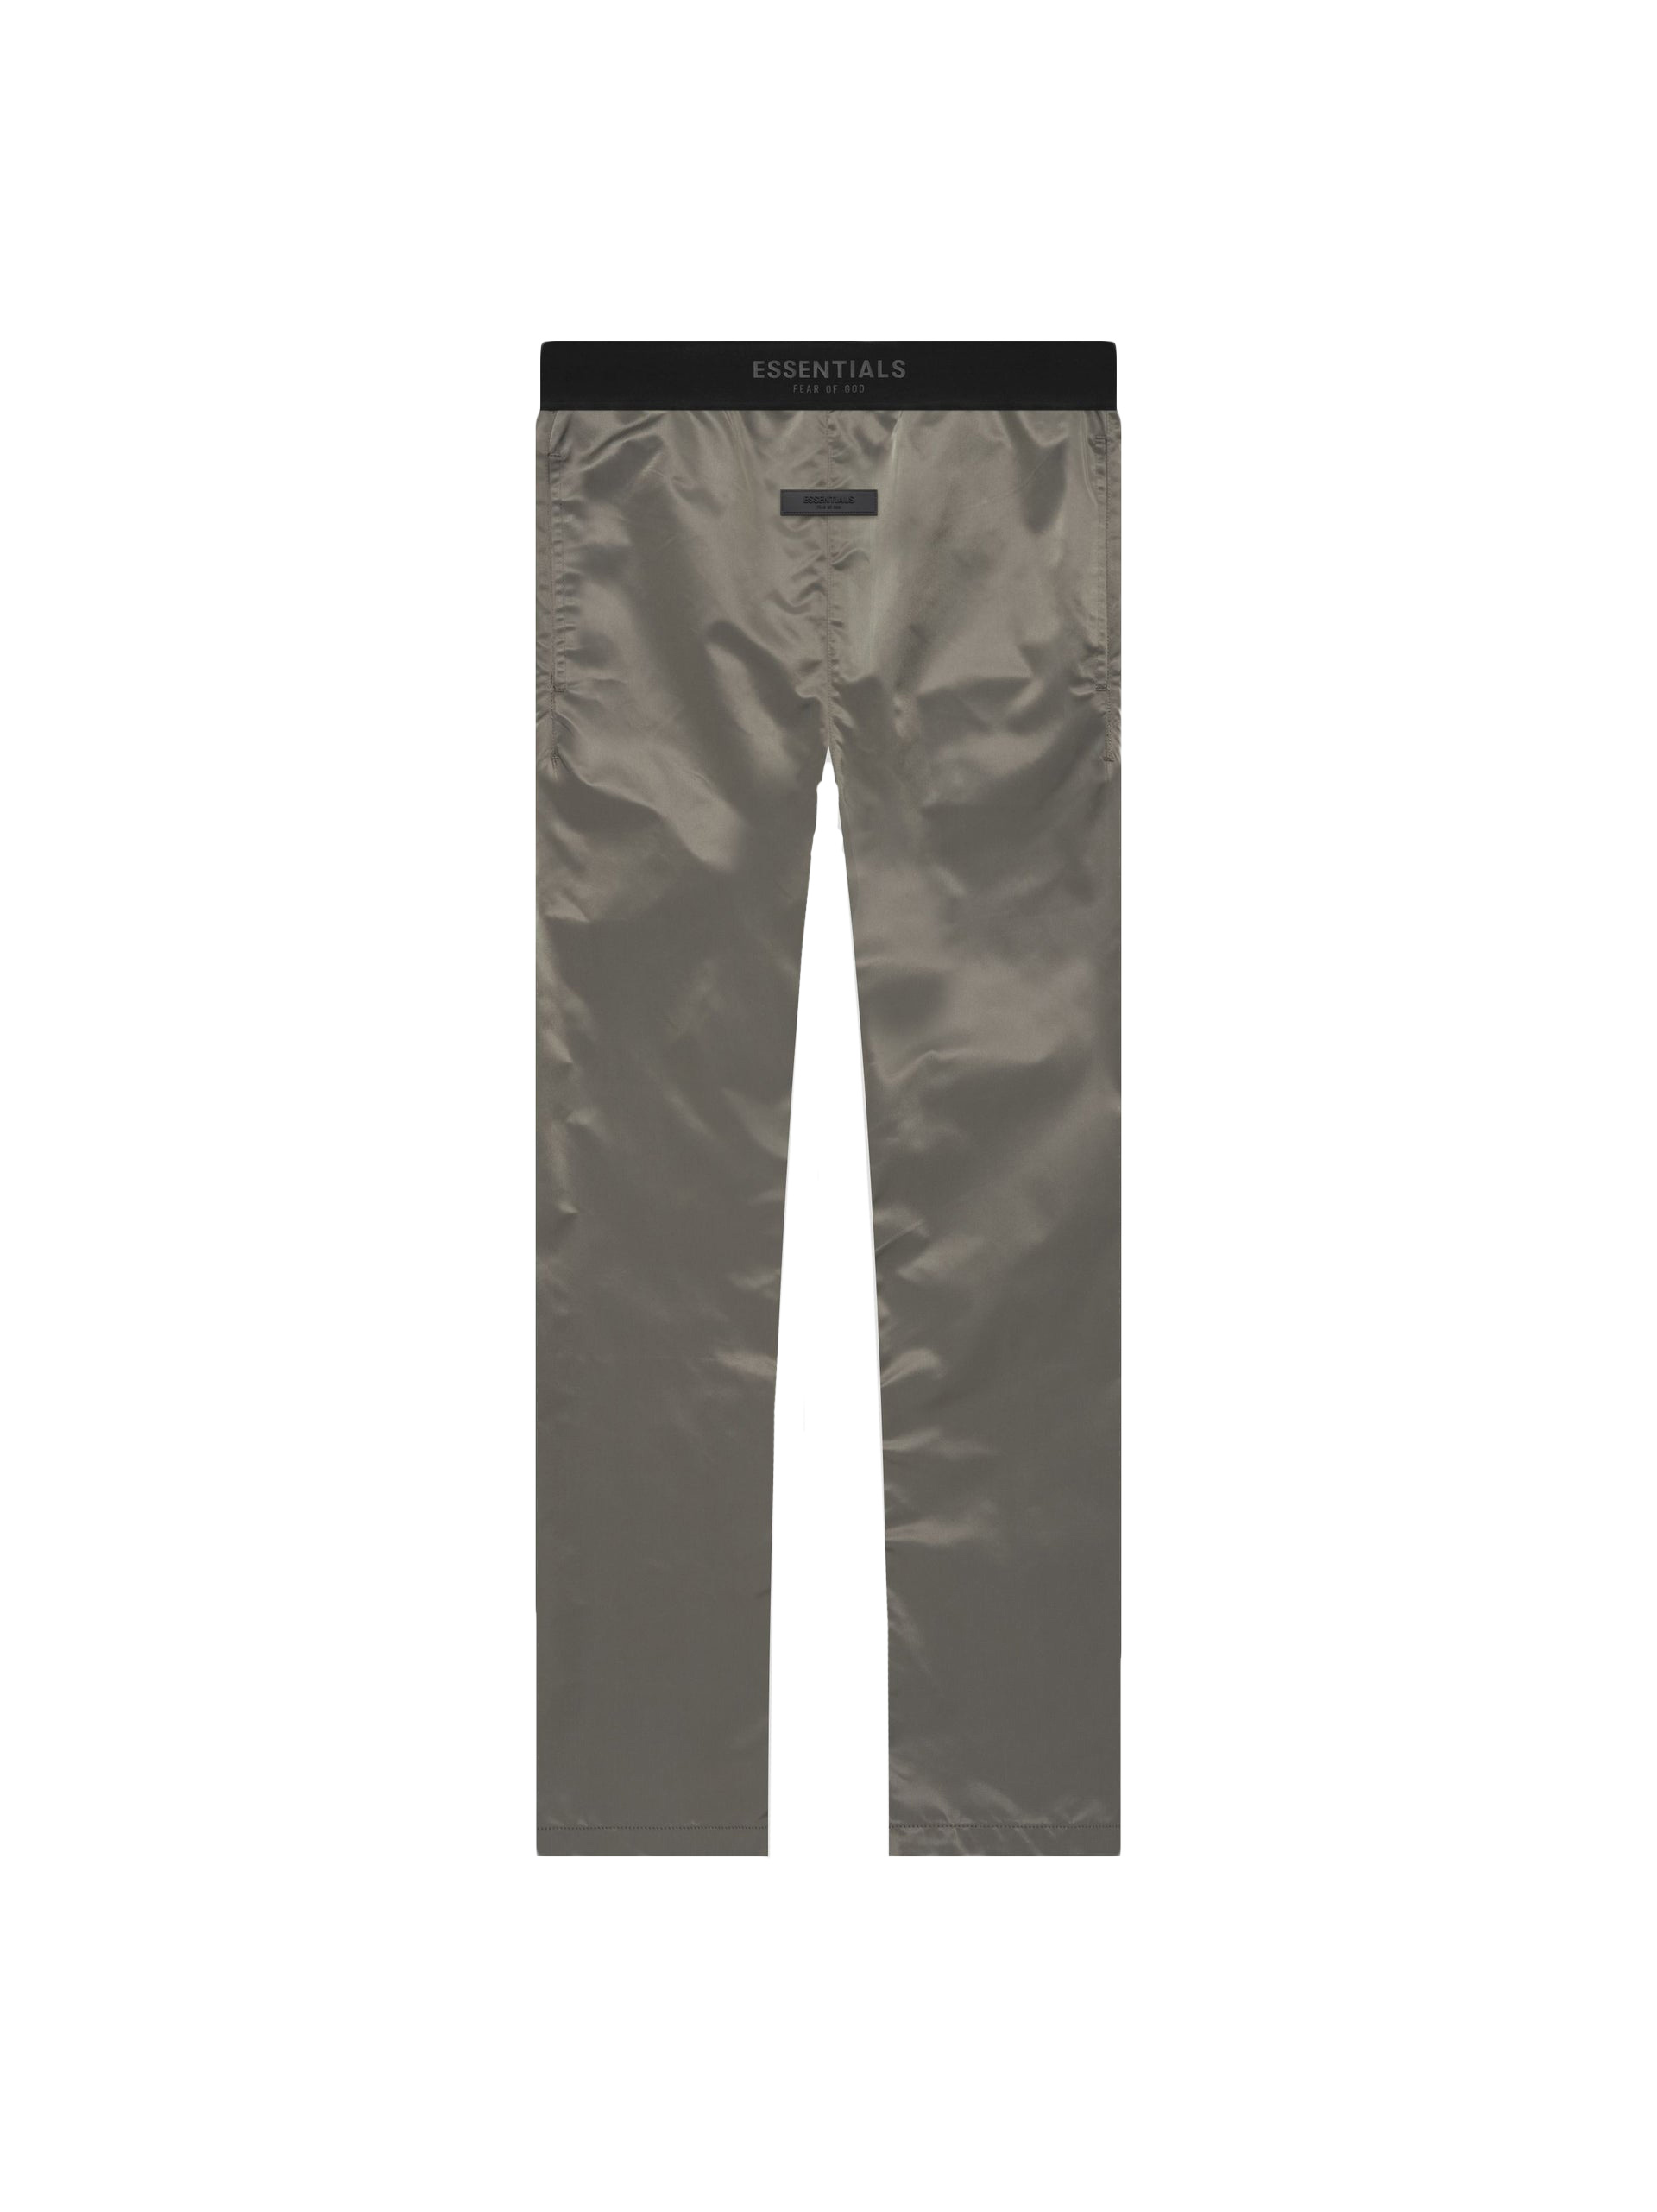 Fear of God Essentials Relaxed Trouser Desert Taupe Men's - SS22 - US